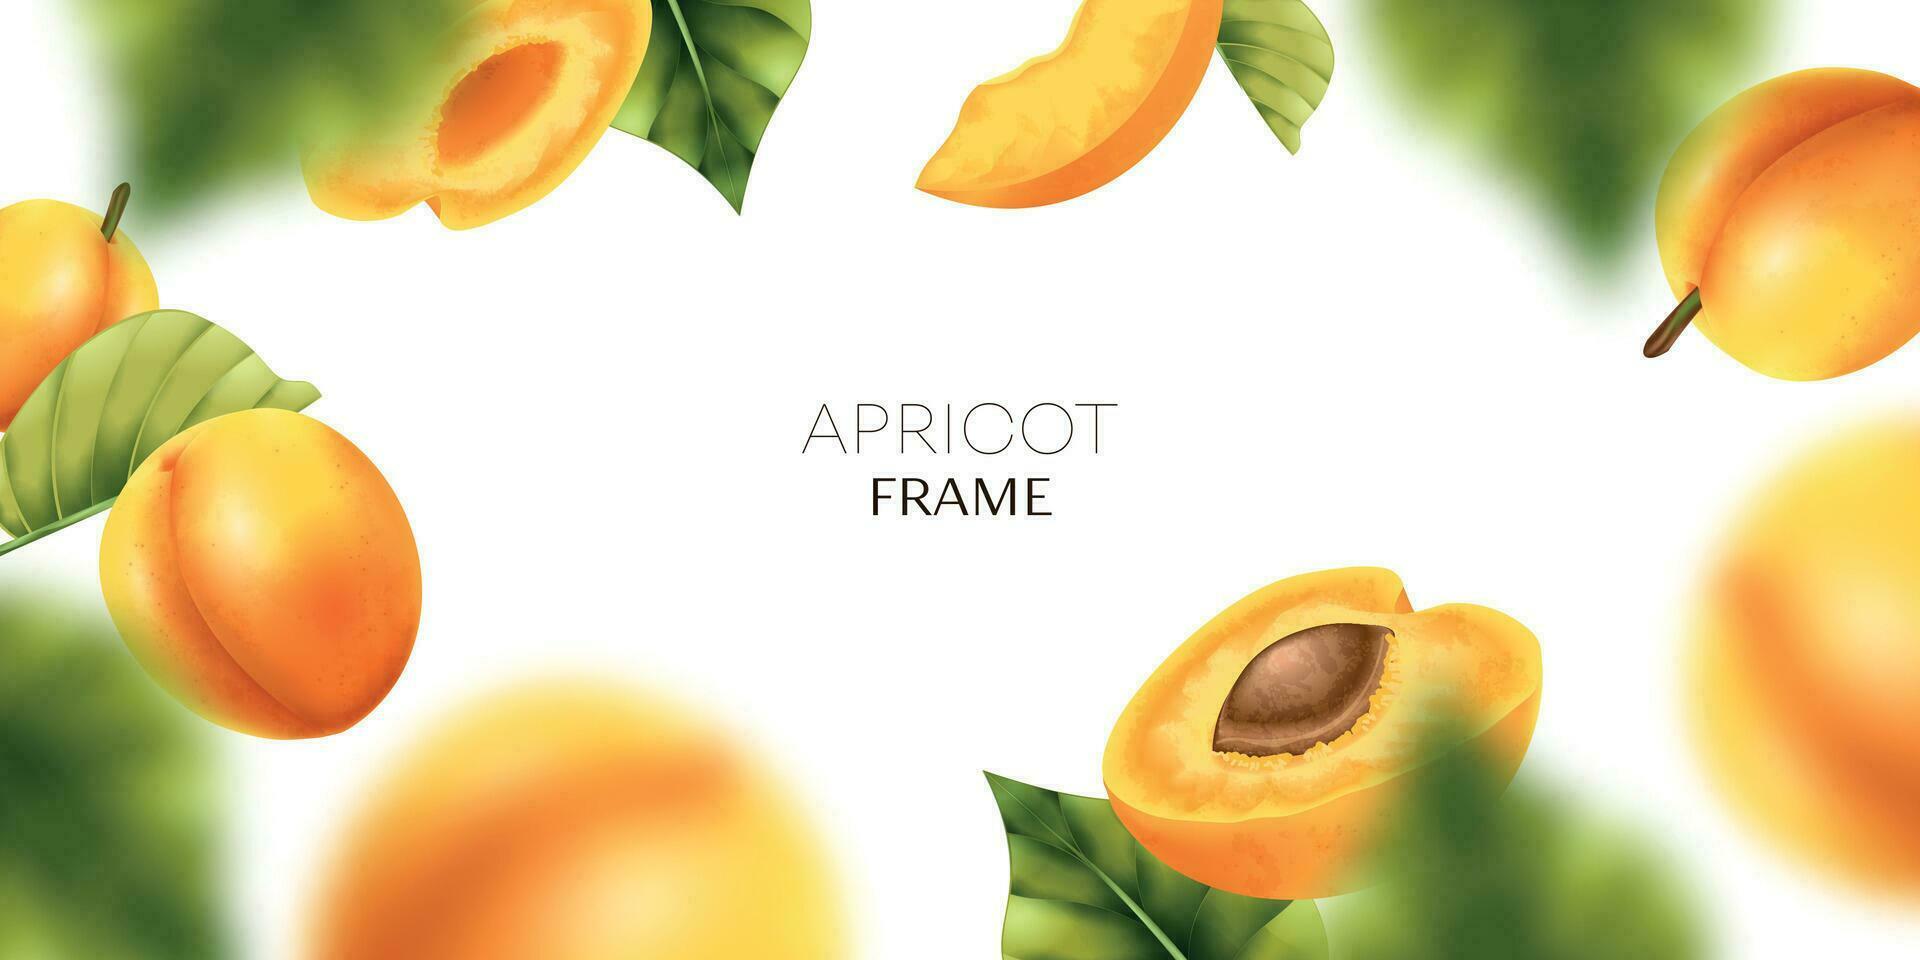 Apricot Realistic Frame Composition vector